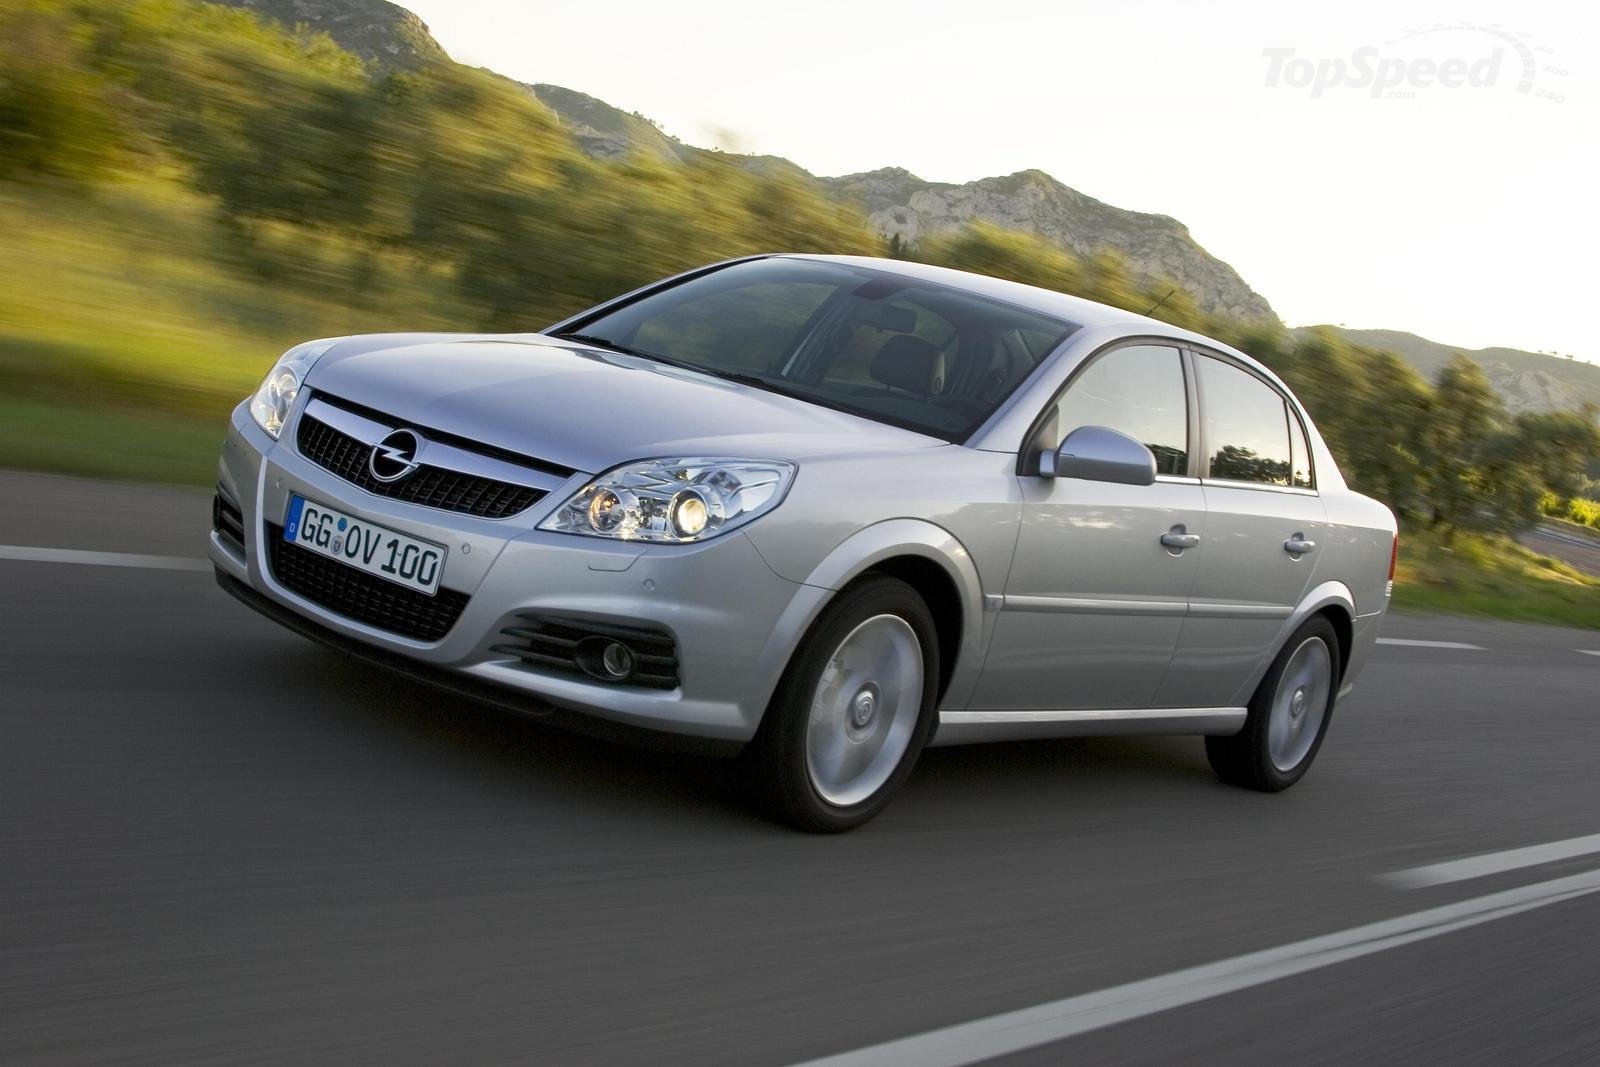 OPEL Vectra. OPEL has developed over 27 models. Some important ones of them